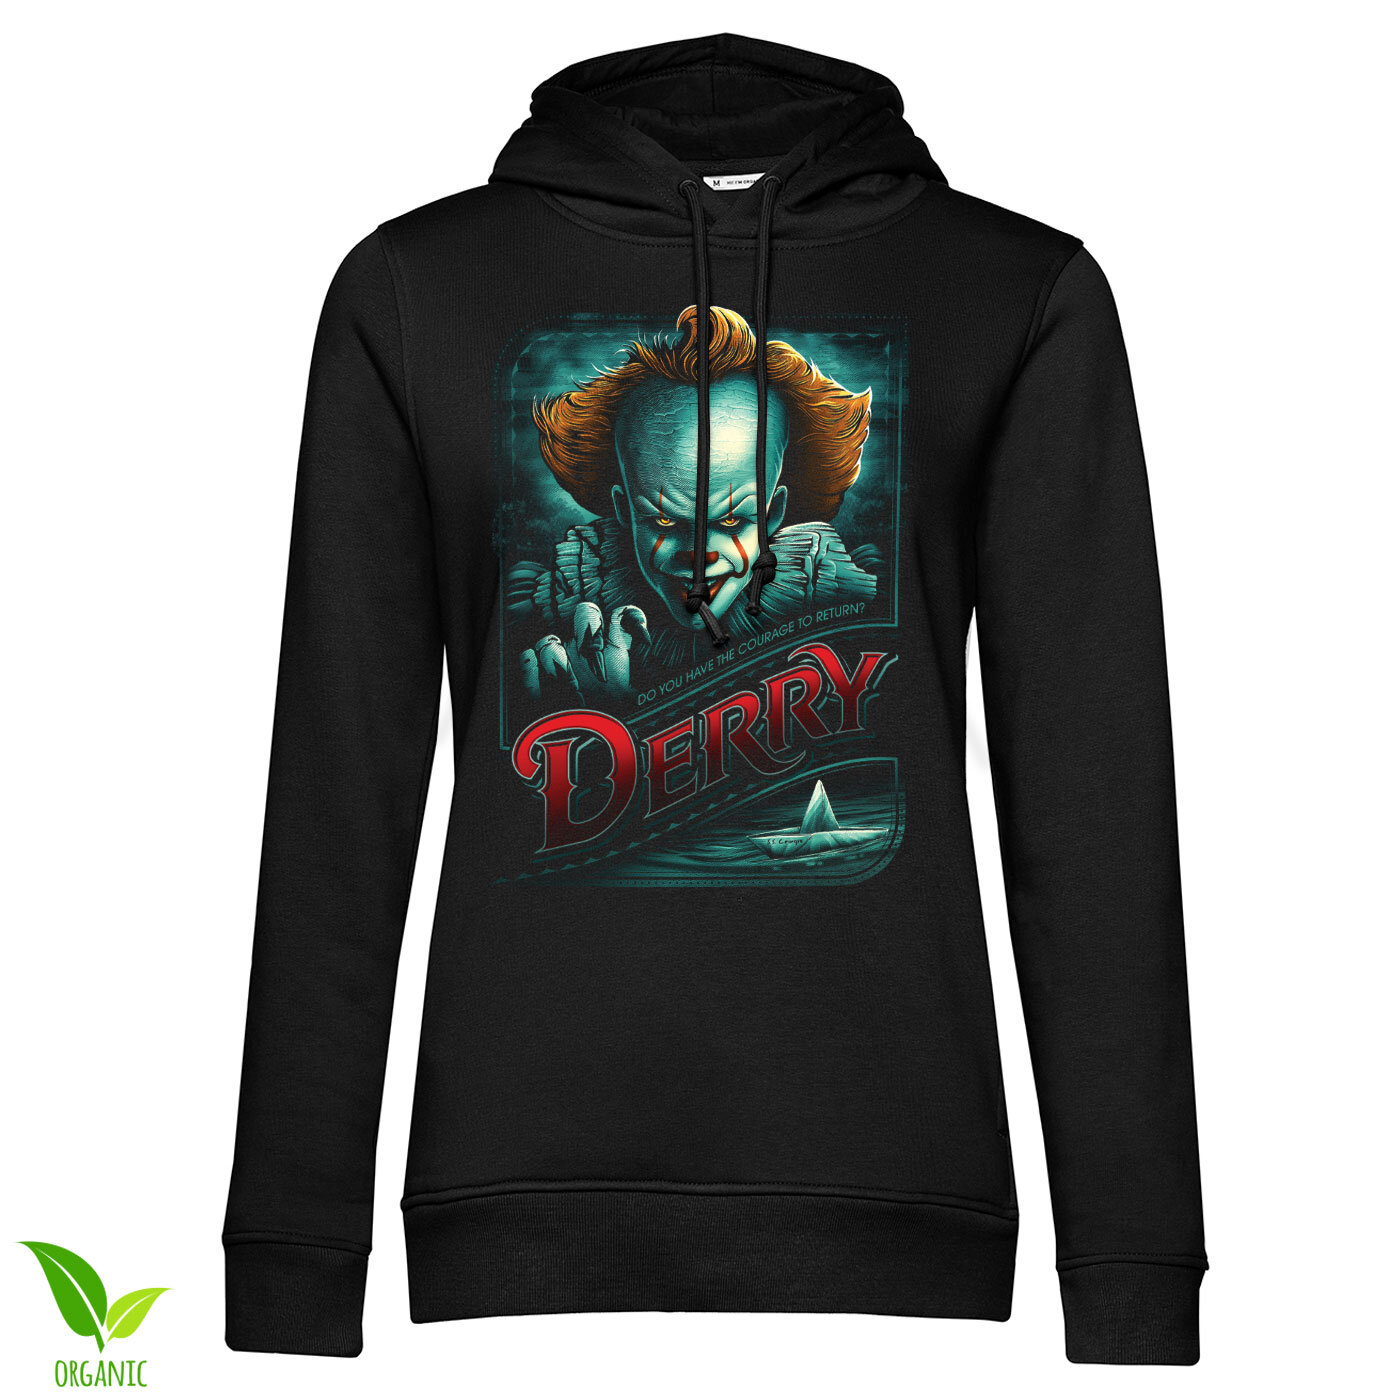 IT - Pennywise in Derry Girls Hoodie